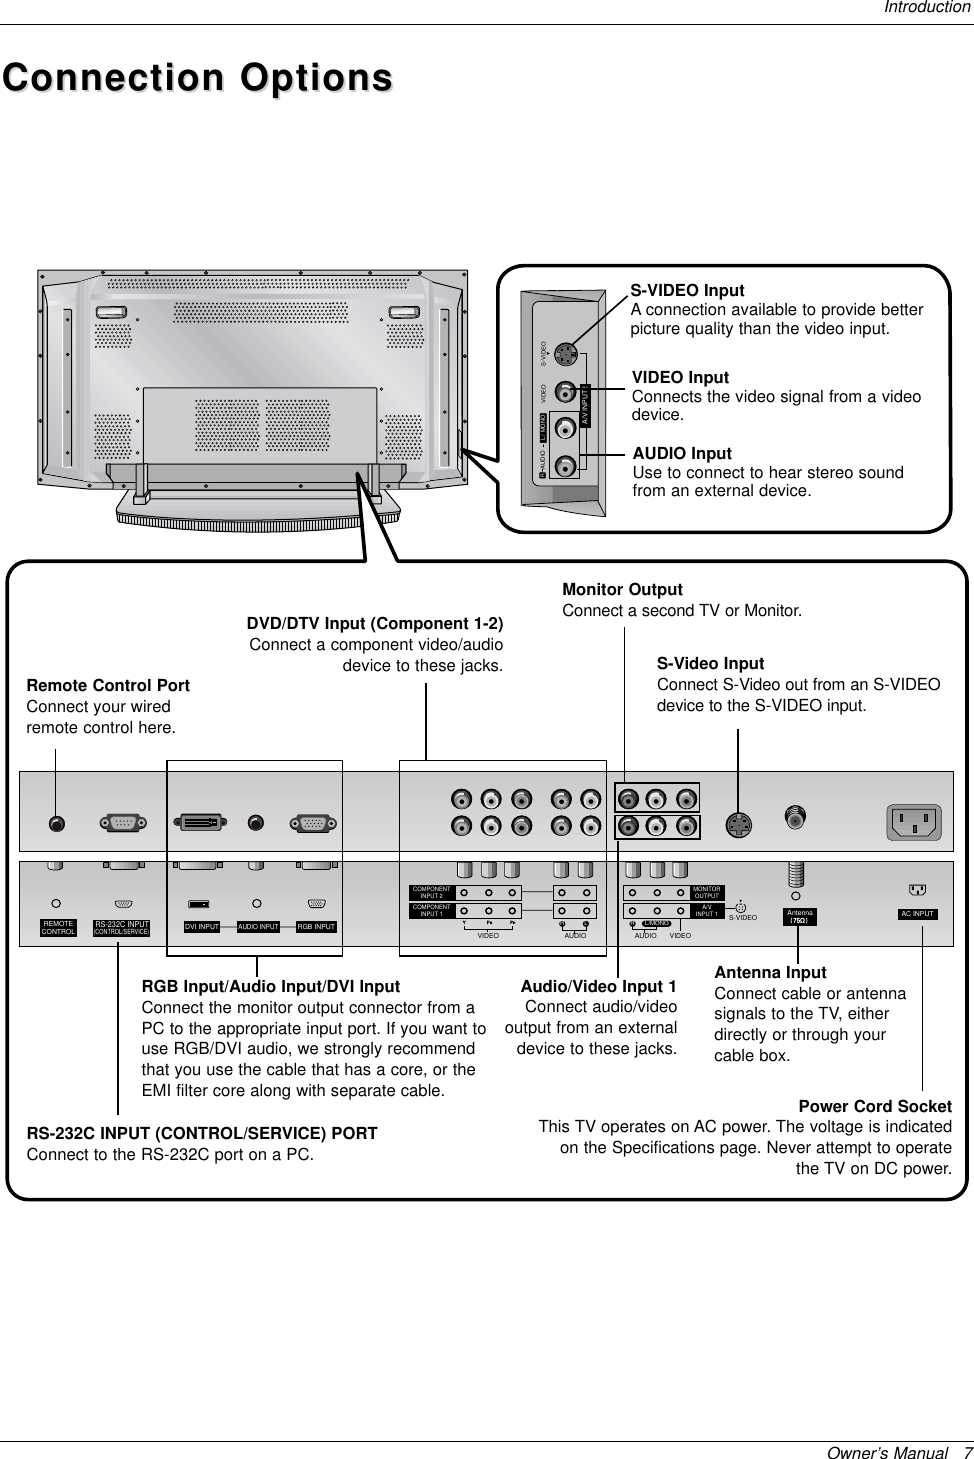 Owner’s Manual   7IntroductionConnection OptionsConnection OptionsRGB INPUTAntennaAUDIO INPUTDVI INPUTS-VIDEOREMOTECONTROLAC INPUTAUDIOVIDEOCOMPONENTINPUT 2COMPONENTINPUT 1MONITOROUTPUTA/VINPUT 1RLAUDIO VIDEORRS-232C INPUT(CONTROL/SERVICE)L/MONORS-VIDEO VIDEO  L / MONO AUDIO A/V INPUT2 Antenna InputConnect cable or antennasignals to the TV, eitherdirectly or through yourcable box.RGB Input/Audio Input/DVI InputConnect the monitor output connector from aPC to the appropriate input port. If you want touse RGB/DVI audio, we strongly recommendthat you use the cable that has a core, or theEMI filter core along with separate cable.Audio/Video Input 1Connect audio/videooutput from an externaldevice to these jacks.DVD/DTV Input (Component 1-2)Connect a component video/audiodevice to these jacks.Monitor OutputConnect a second TV or Monitor.Remote Control PortConnect your wiredremote control here.S-Video InputConnect S-Video out from an S-VIDEOdevice to the S-VIDEO input.Power Cord SocketThis TV operates on AC power. The voltage is indicatedon the Specifications page. Never attempt to operatethe TV on DC power.RS-232C INPUT (CONTROL/SERVICE) PORTConnect to the RS-232C port on a PC.S-VIDEO InputA connection available to provide betterpicture quality than the video input.VIDEO InputConnects the video signal from a videodevice.AUDIO InputUse to connect to hear stereo soundfrom an external device.